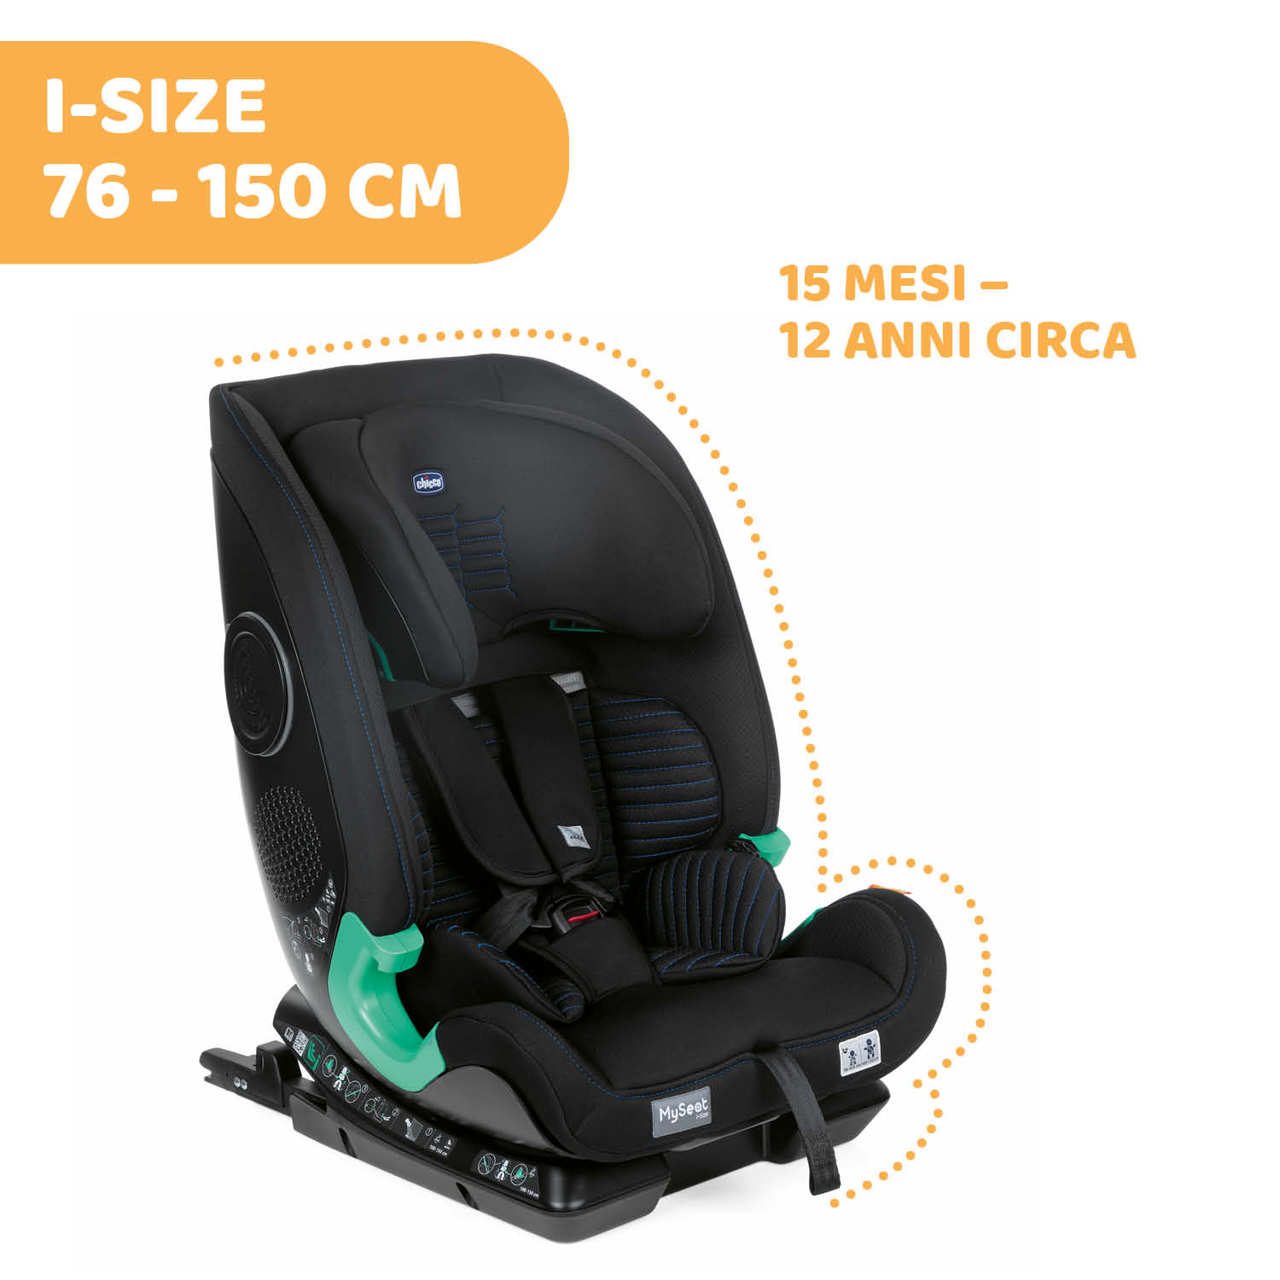 MySeat i-Size Air (76-150 cm) - Edizione speciale "Zip&Wash" image number 1